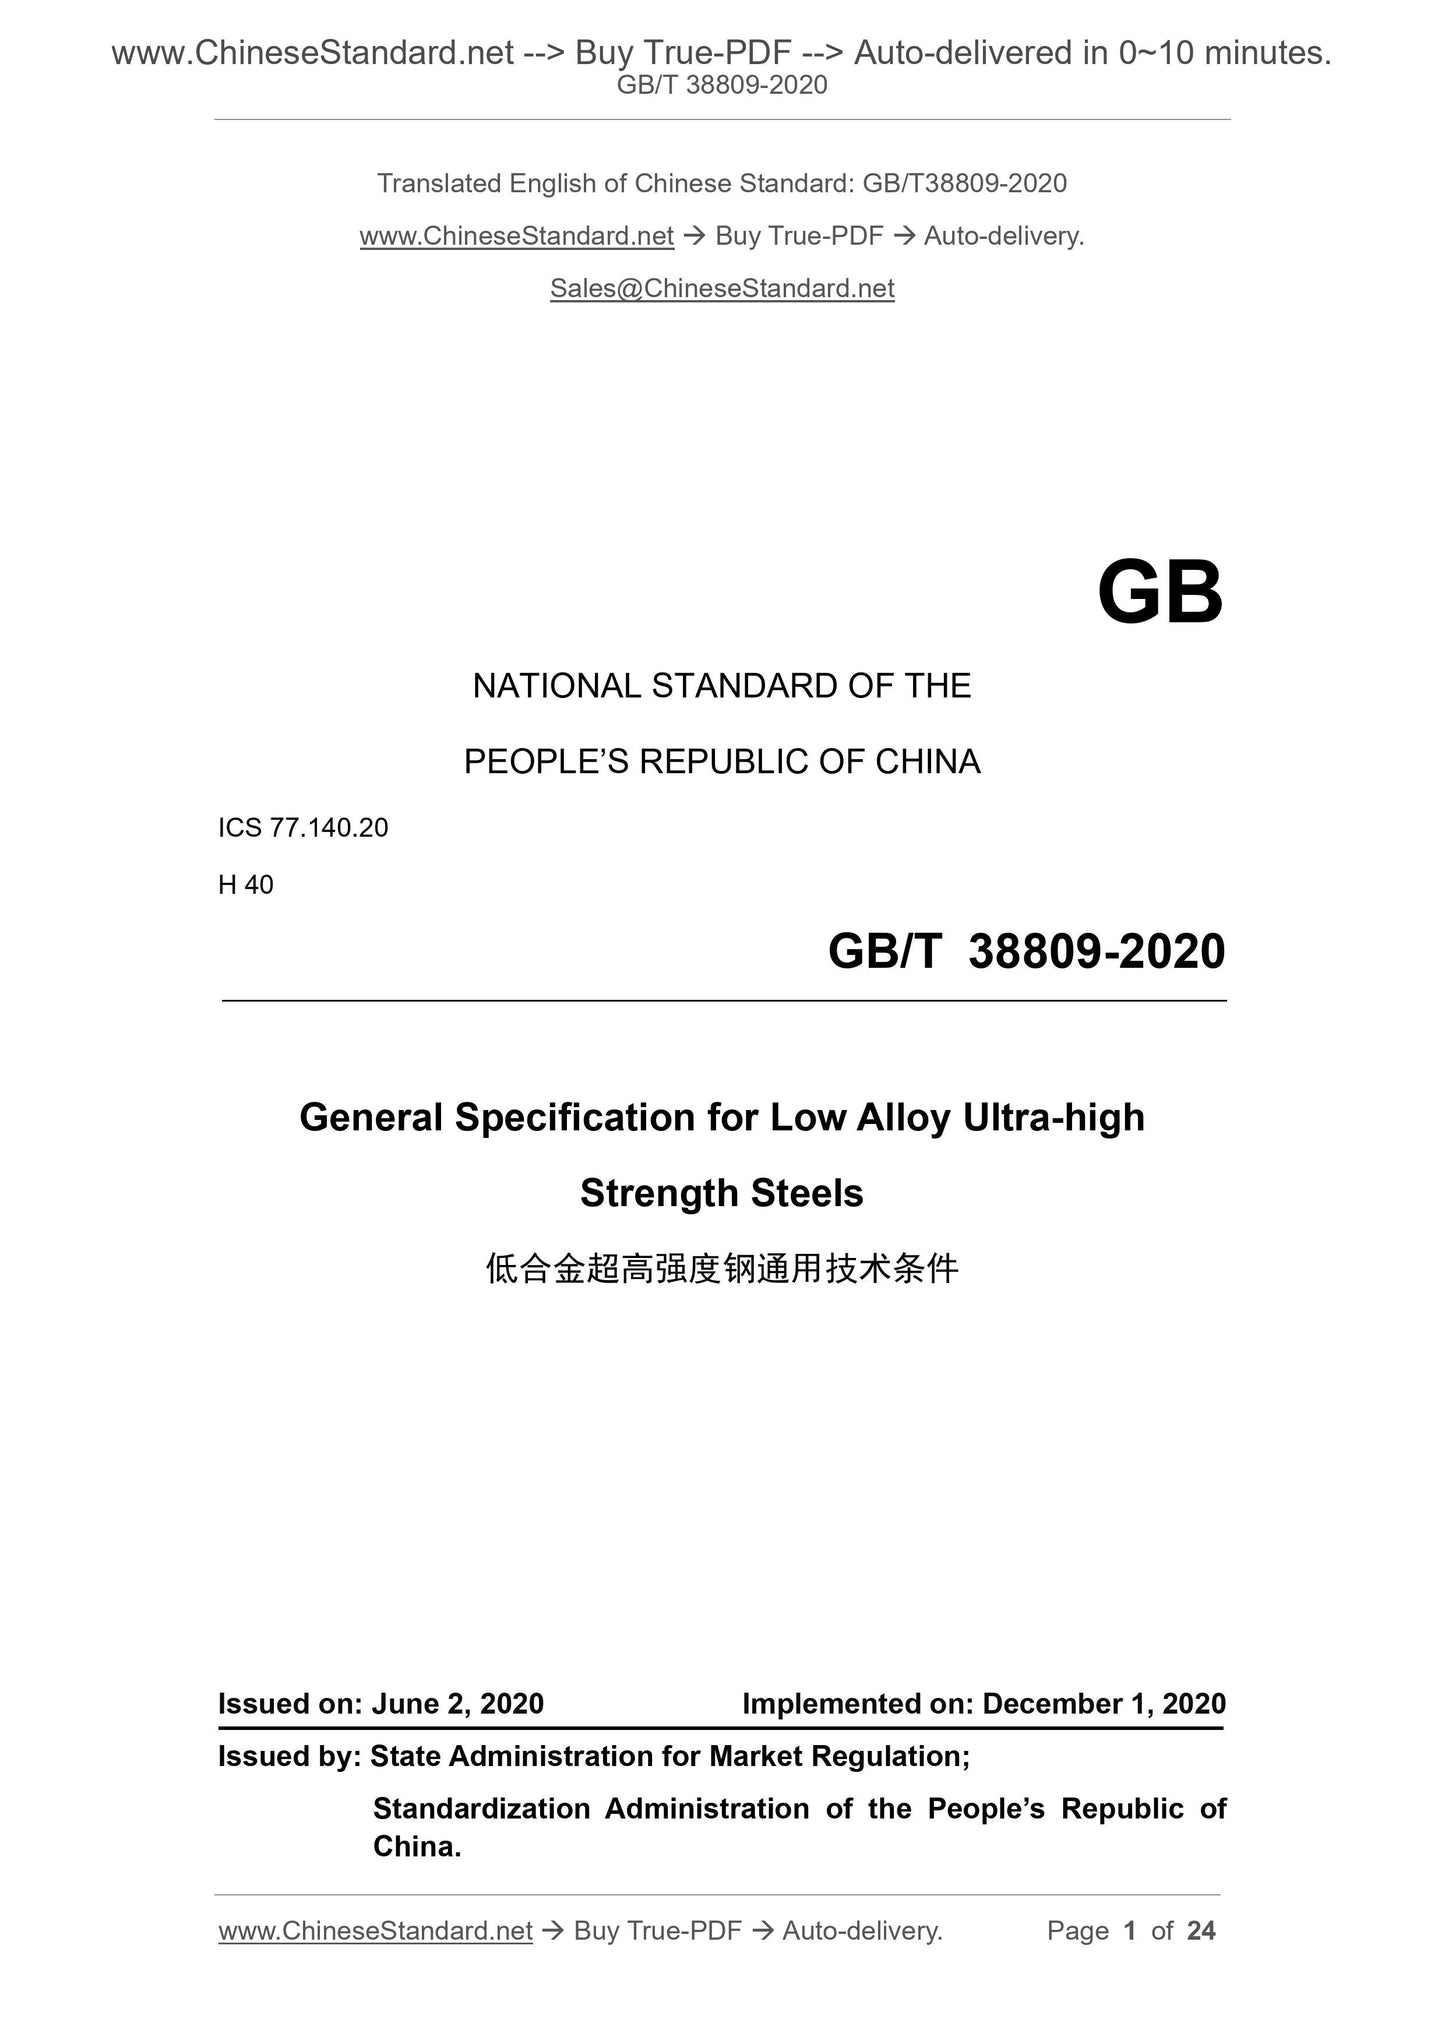 GB/T 38809-2020 Page 1